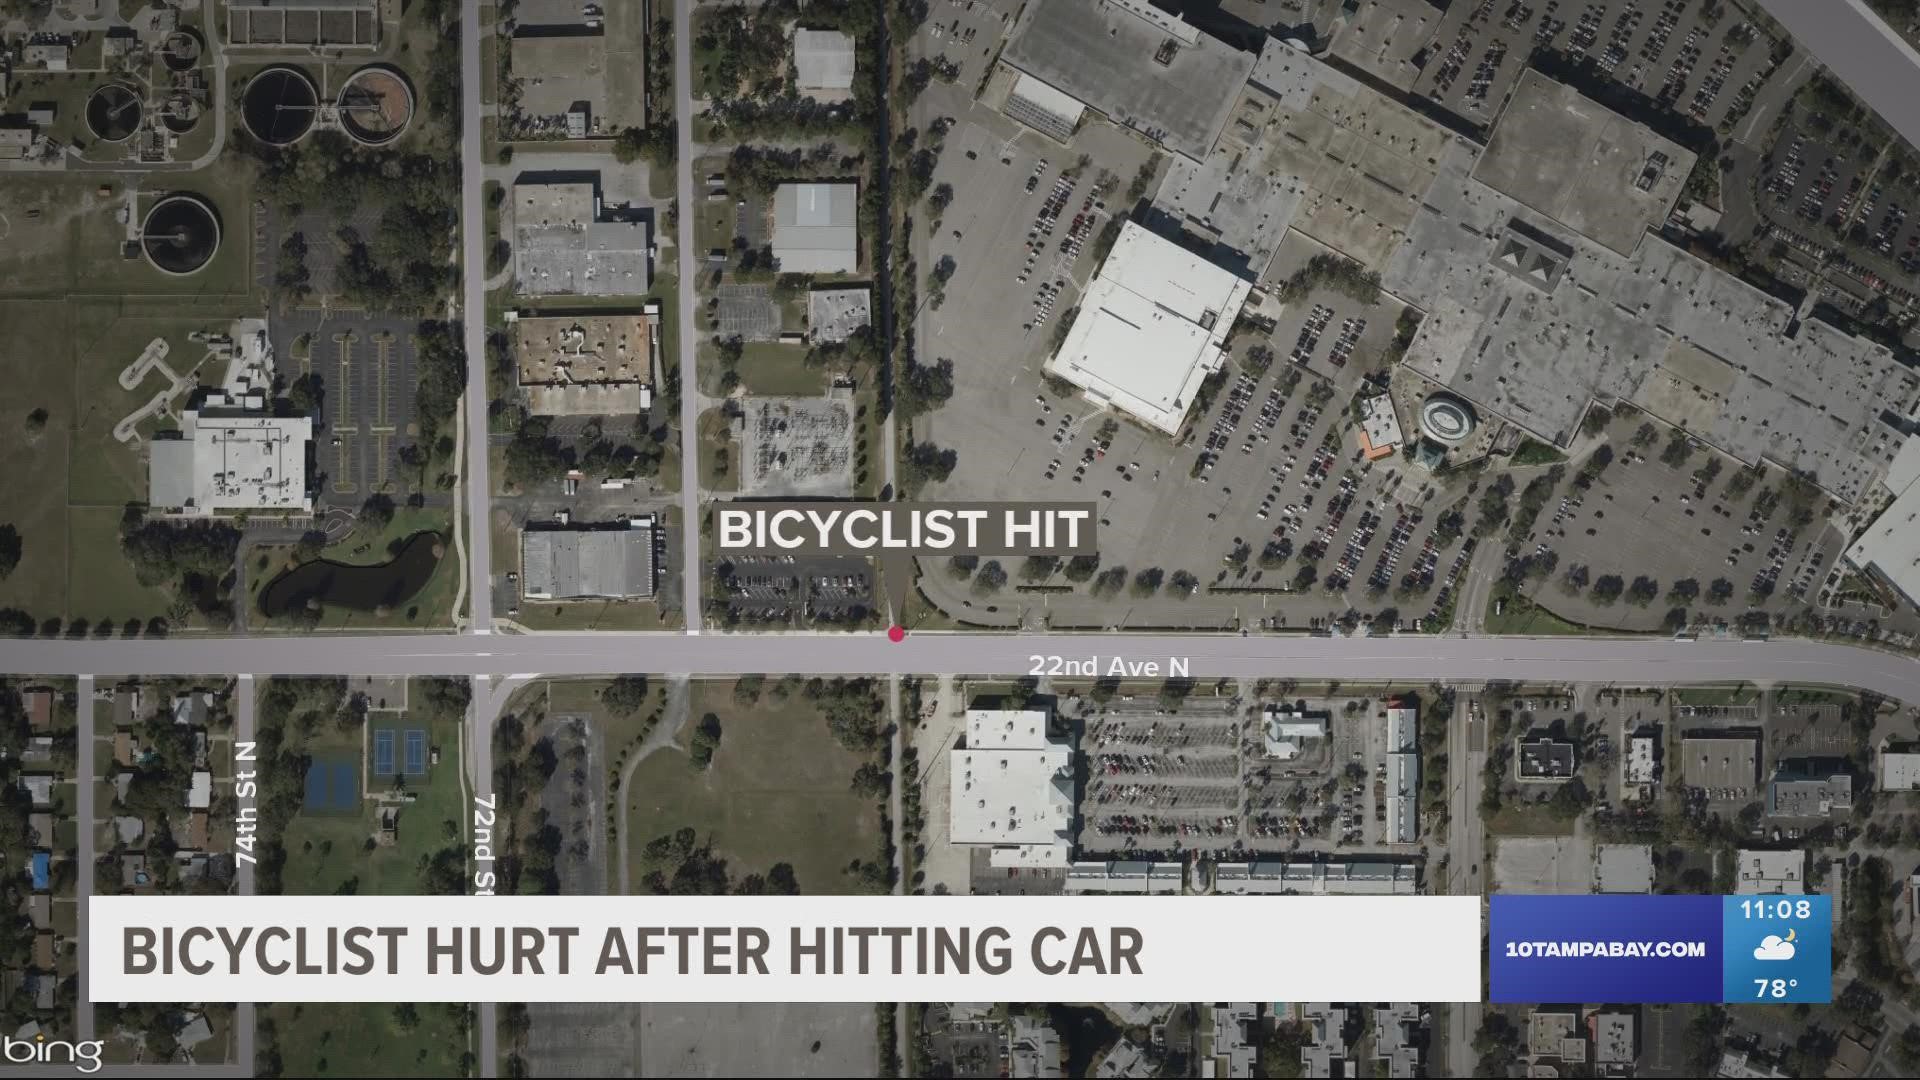 St. Pete Police say the 56-year-old bicyclist entered the roadway and crashed into the front passenger side fender of the car.